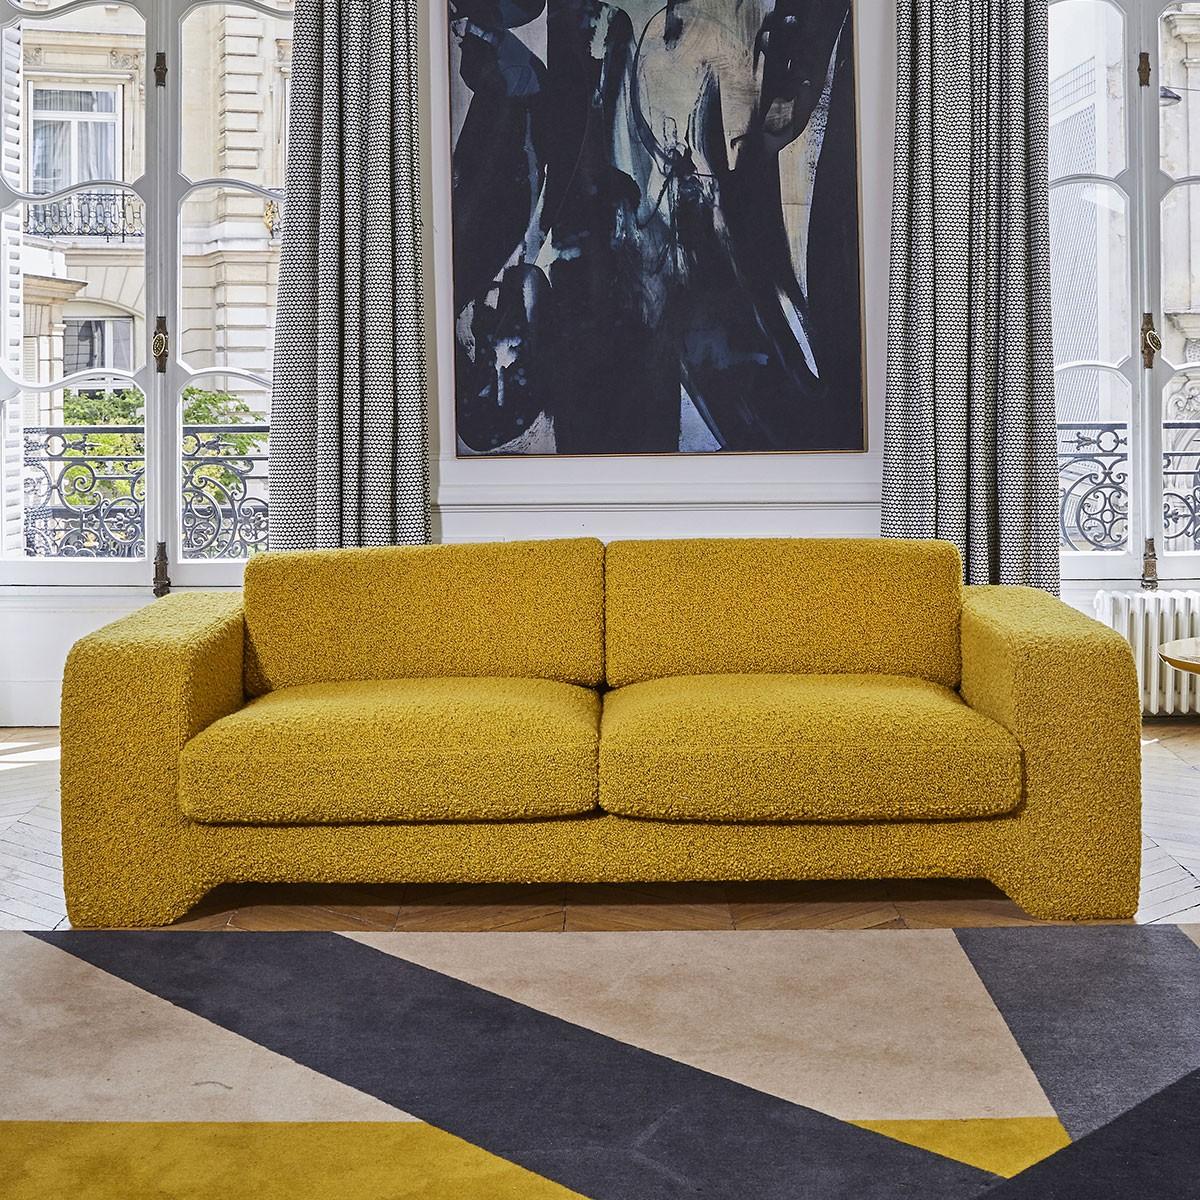 Popus Editions Giovanna 2.5 seater sofa in navy verone velvet upholstery

Giovanna is a sofa with a strong profile. A sober, plush line, with this famous detail that changes everything, so as not to forget its strength of character and this